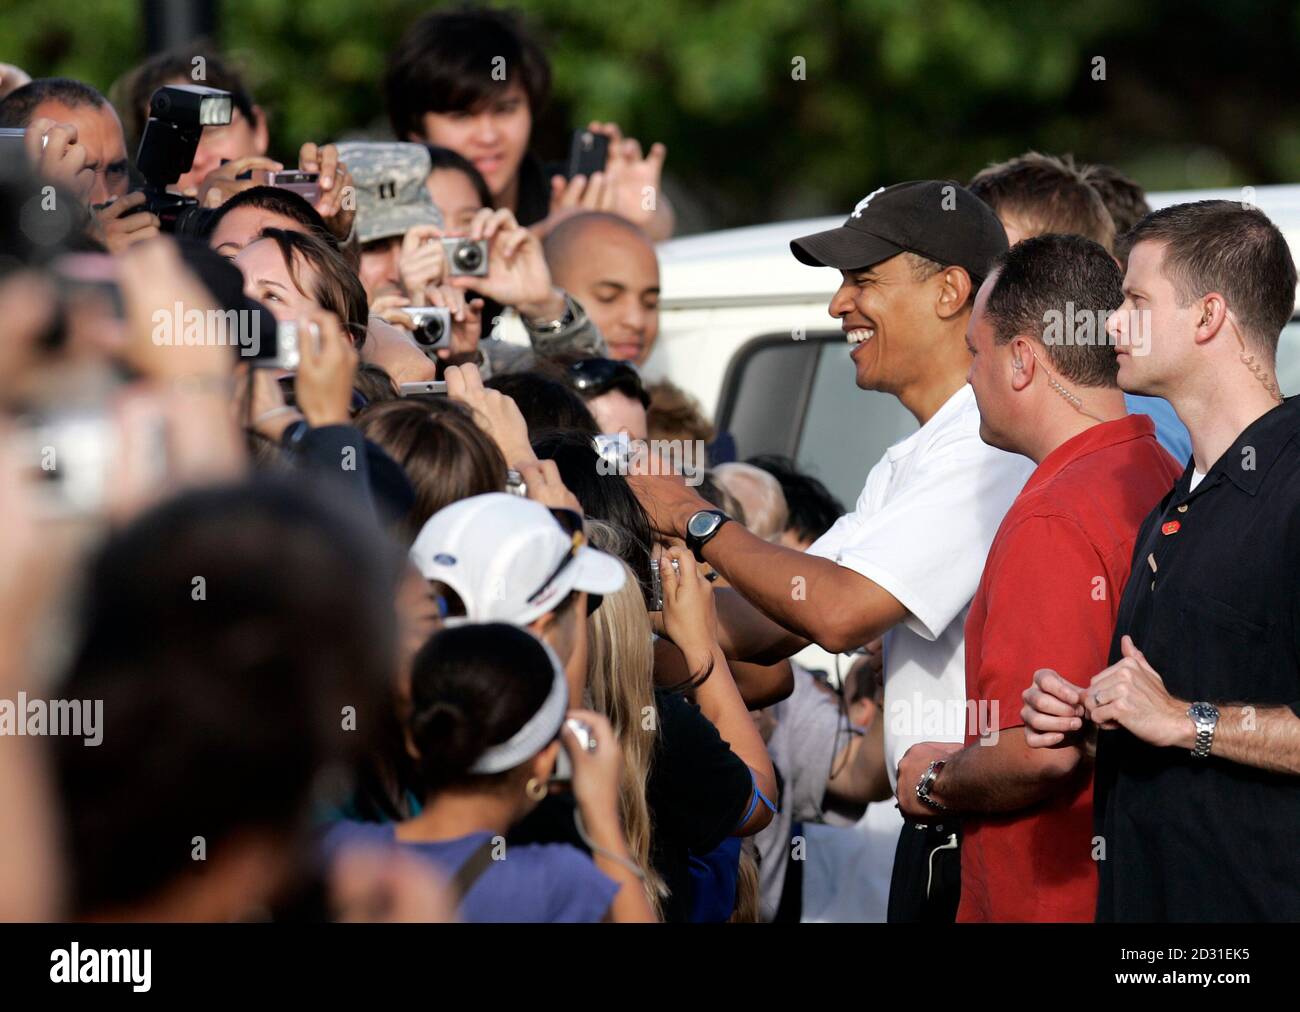 US President-elect Barack Obama greets the crowd after working out at the Semper Fit gym on Marine Corps Base Hawaii in Kailua, Hawaii on December 31, 2008. REUTERS/Hugh Gentry (UNITED STATES) Stock Photo